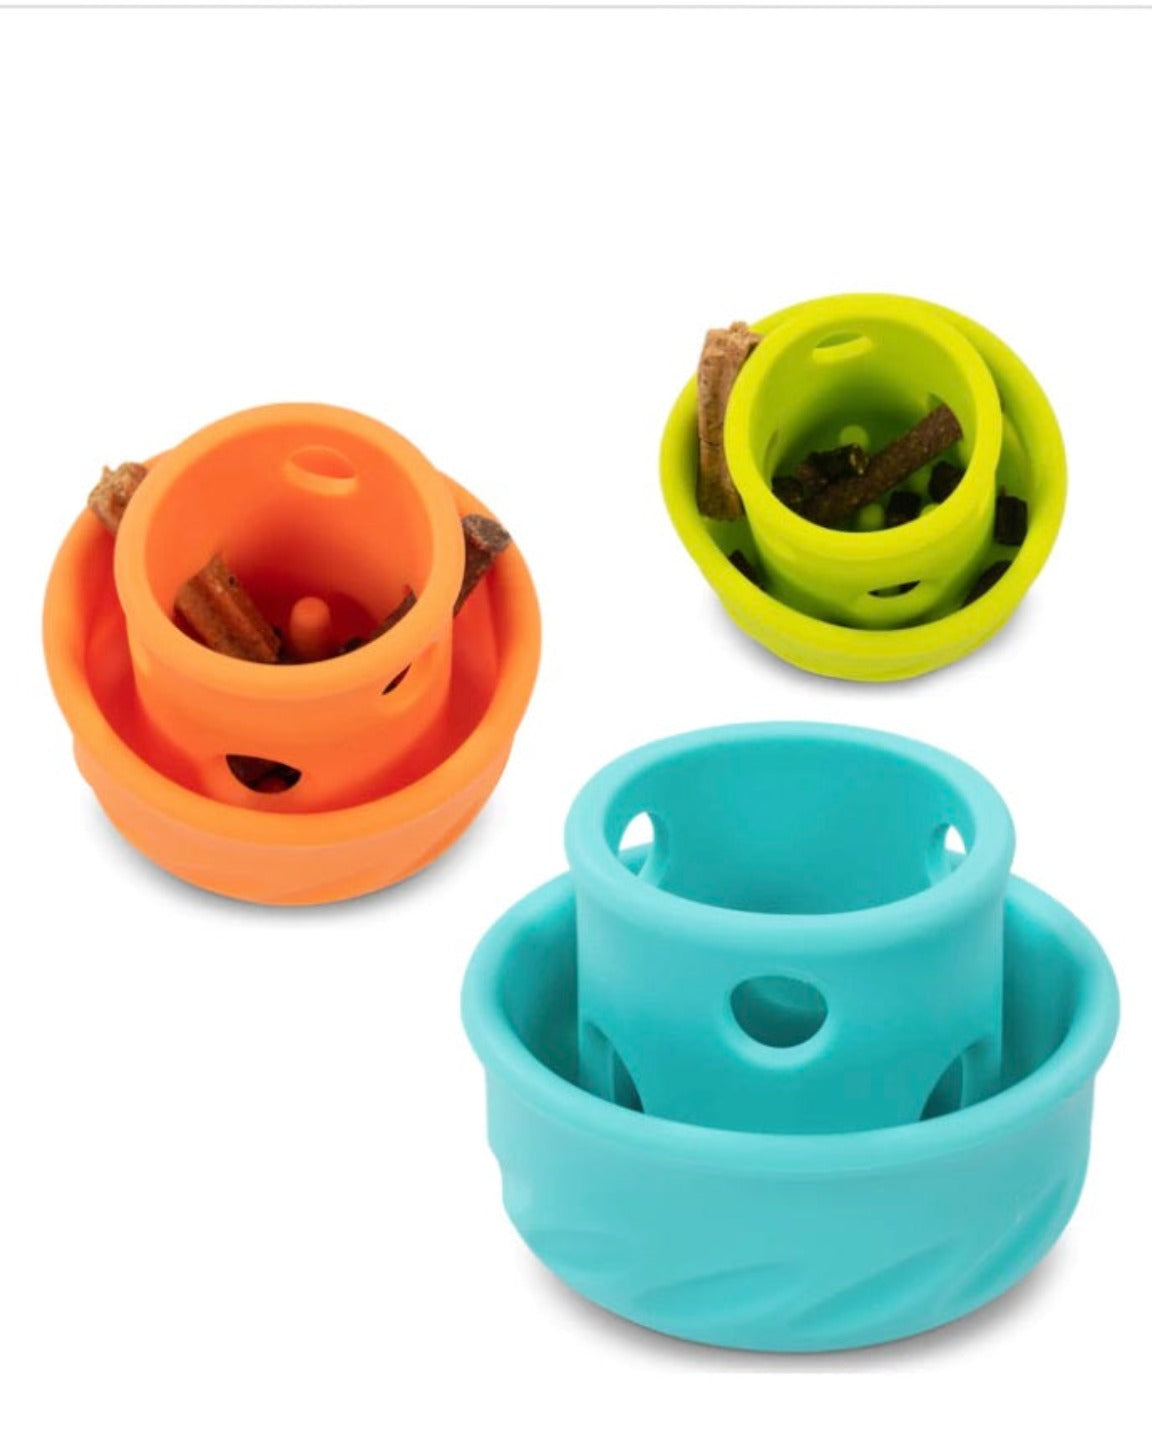 The interactive and durable dog toy